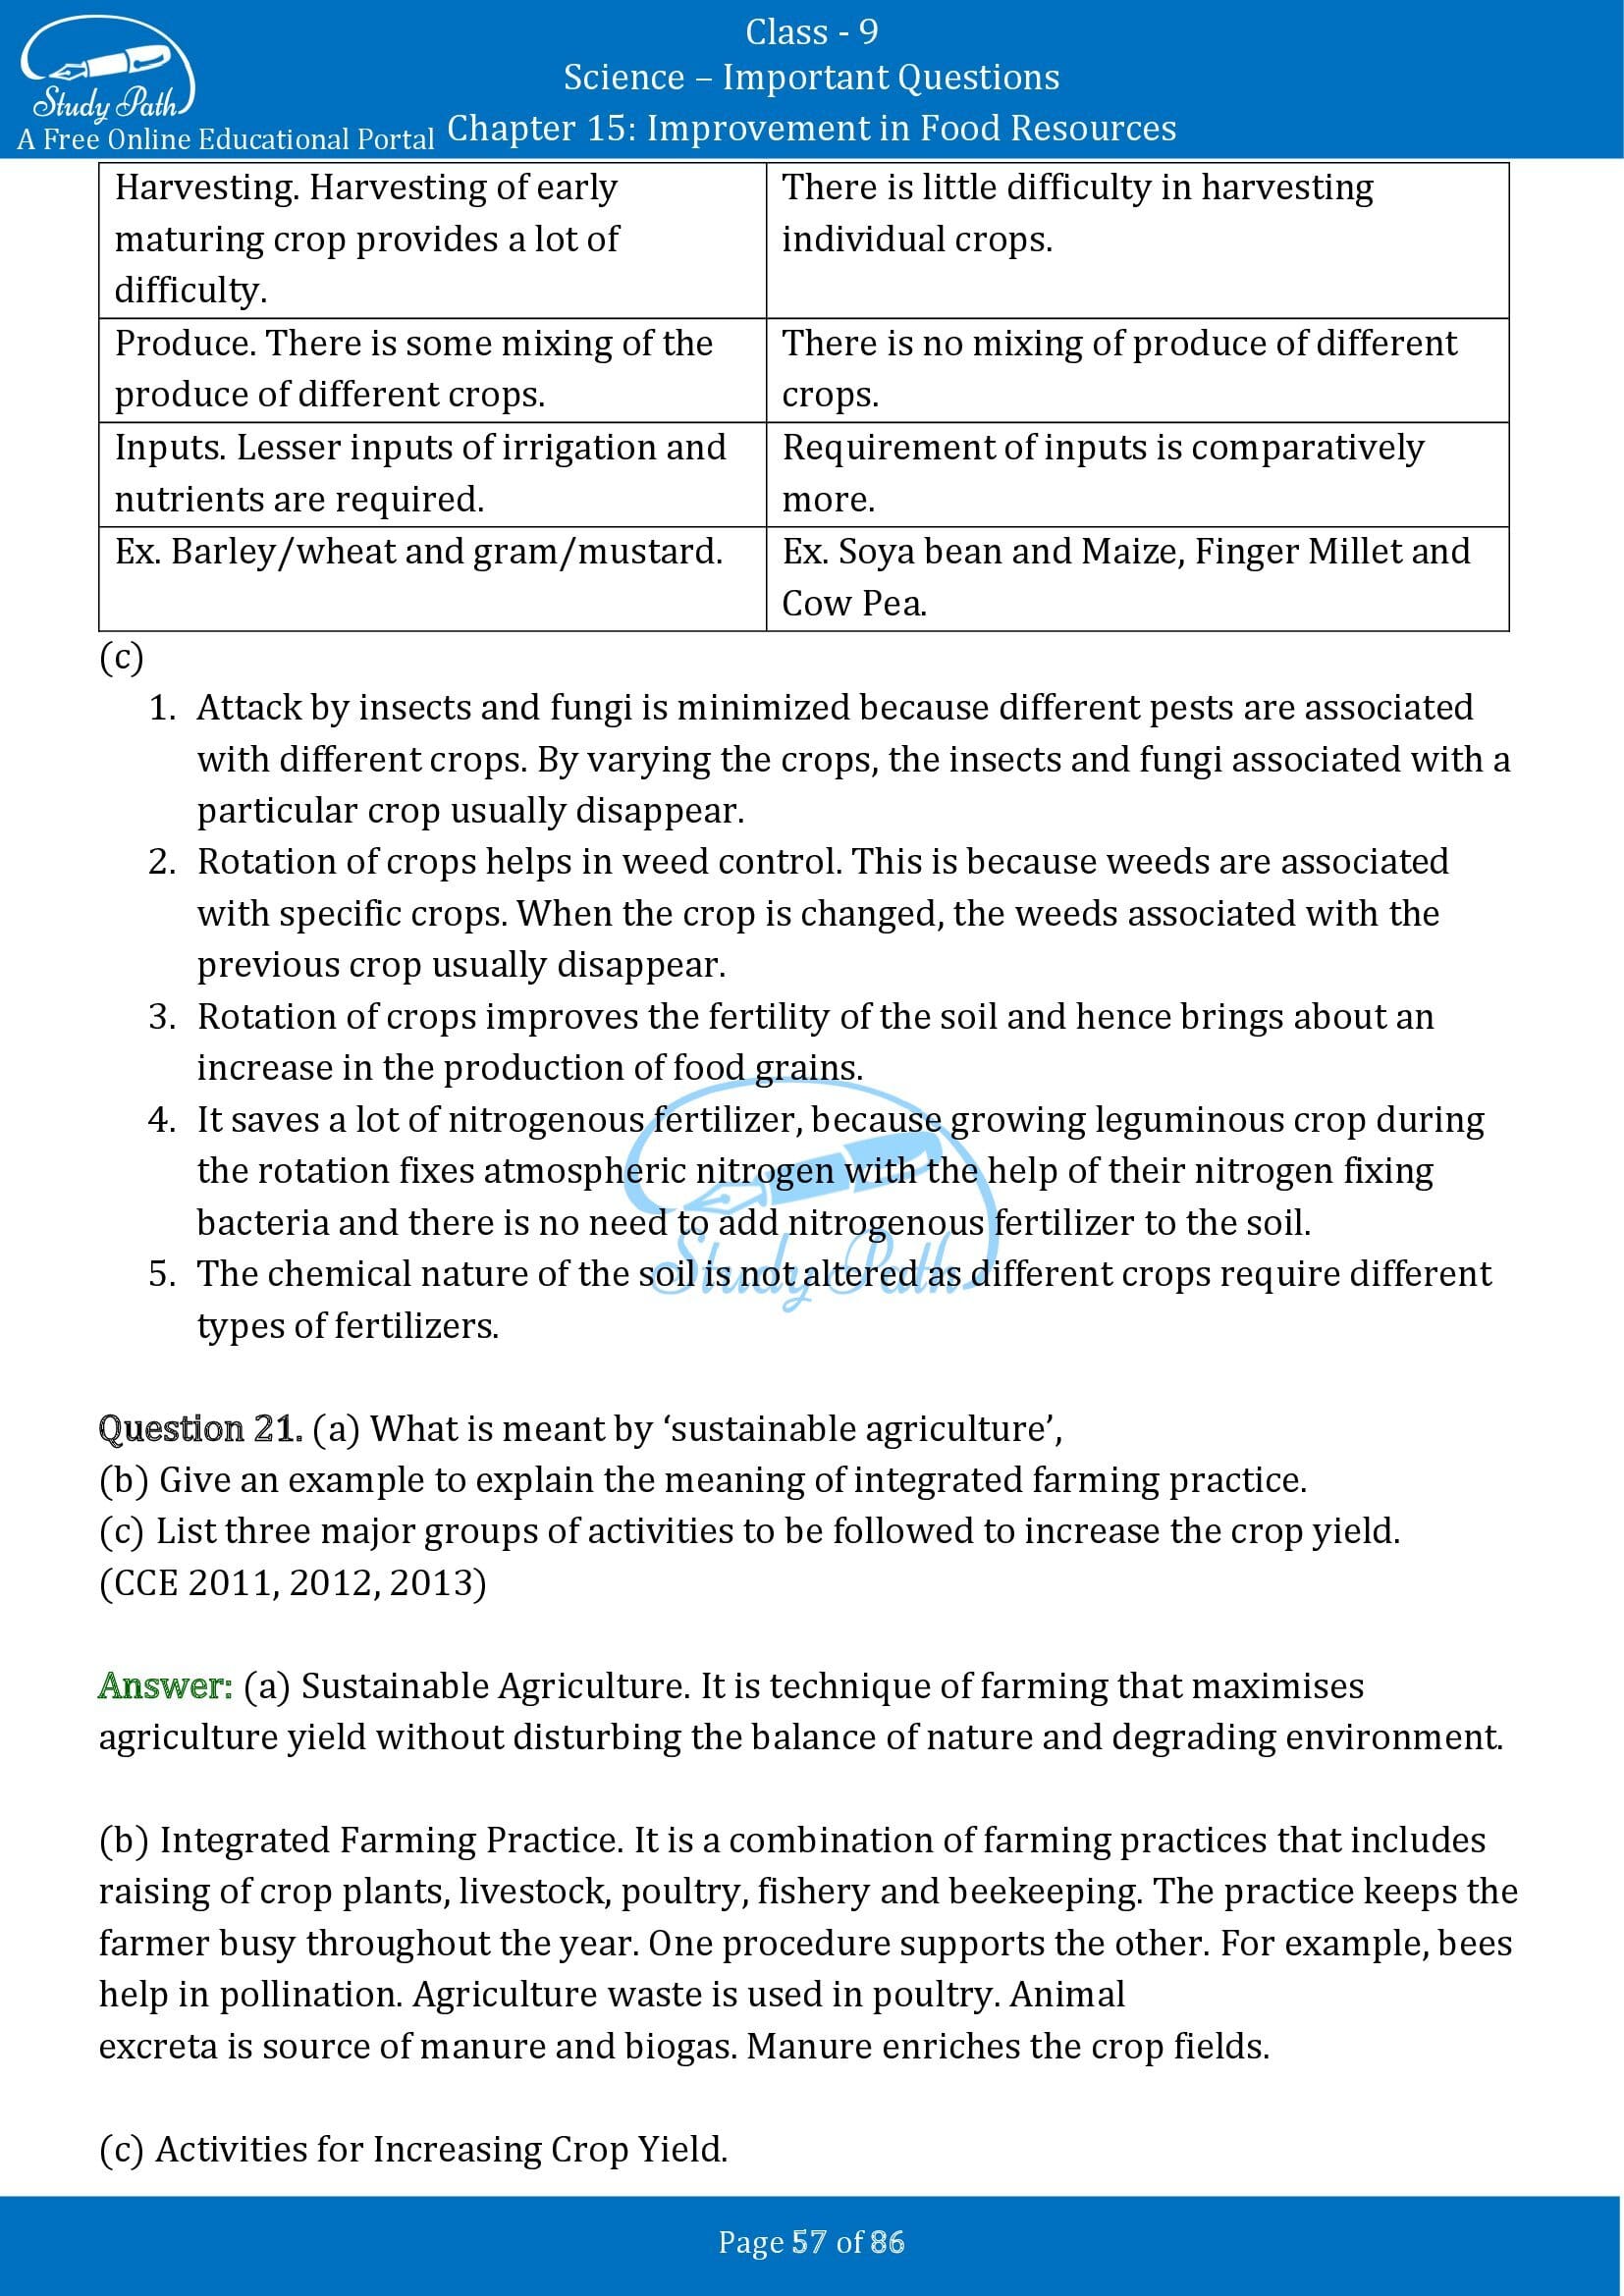 Important Questions for Class 9 Science Chapter 15 Improvement in Food Resources 00057